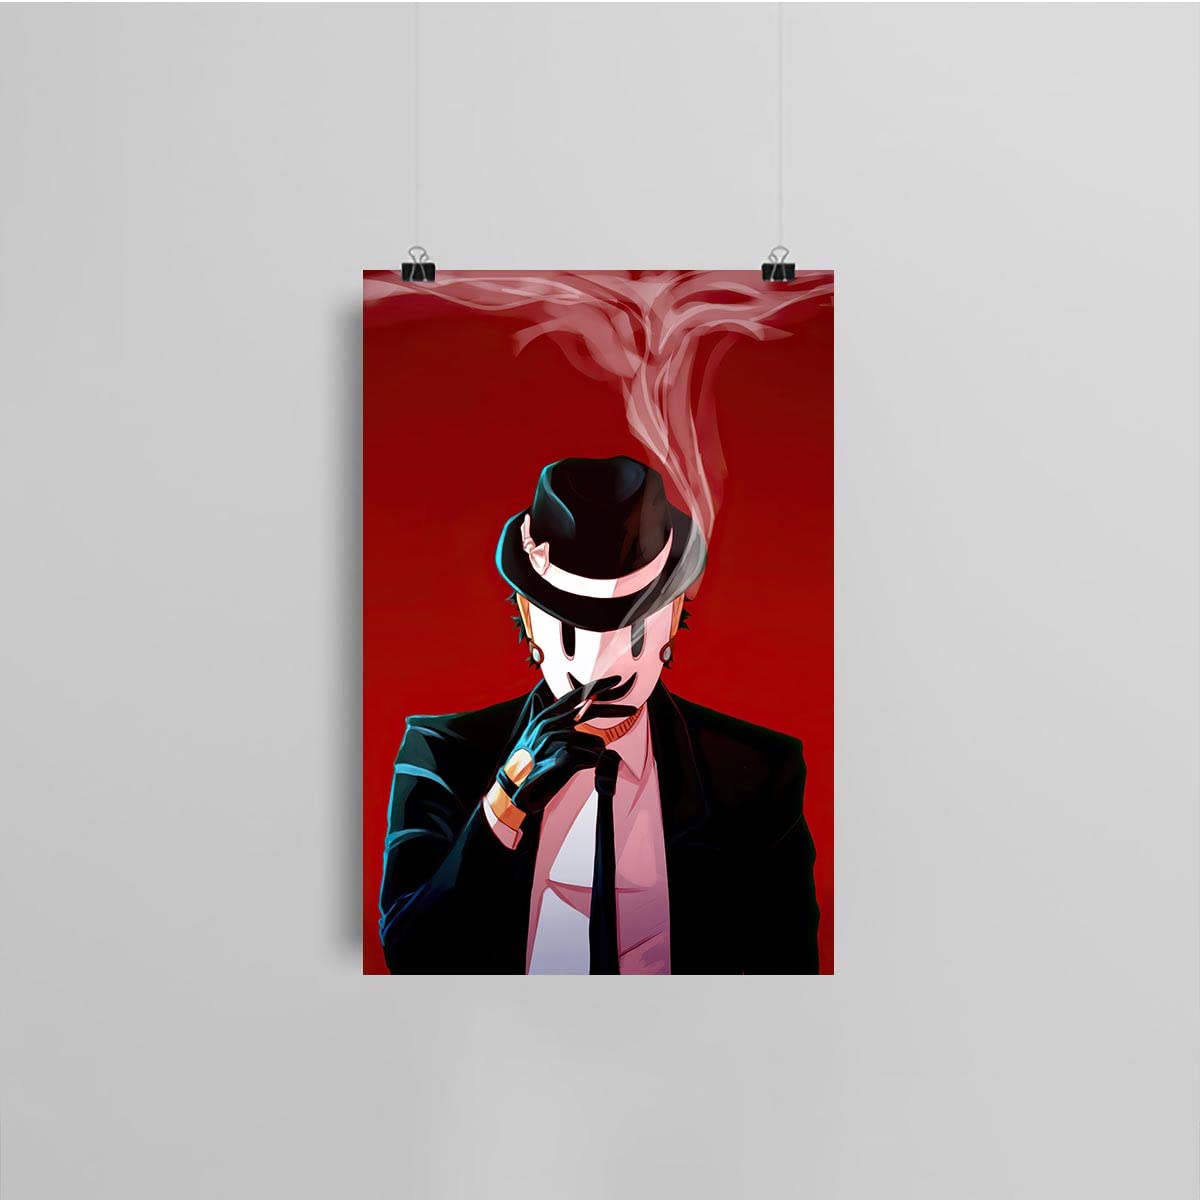 AFUT Rise Invasion Poster,Sniper Mask Man,Canvas Wall Art For Living Room Decor Aesthetic Vintage Posters & Prints Farmhouse Kitchen Wall Decor Preppy Room Decor Aesthetic Unframed 12x18 inches